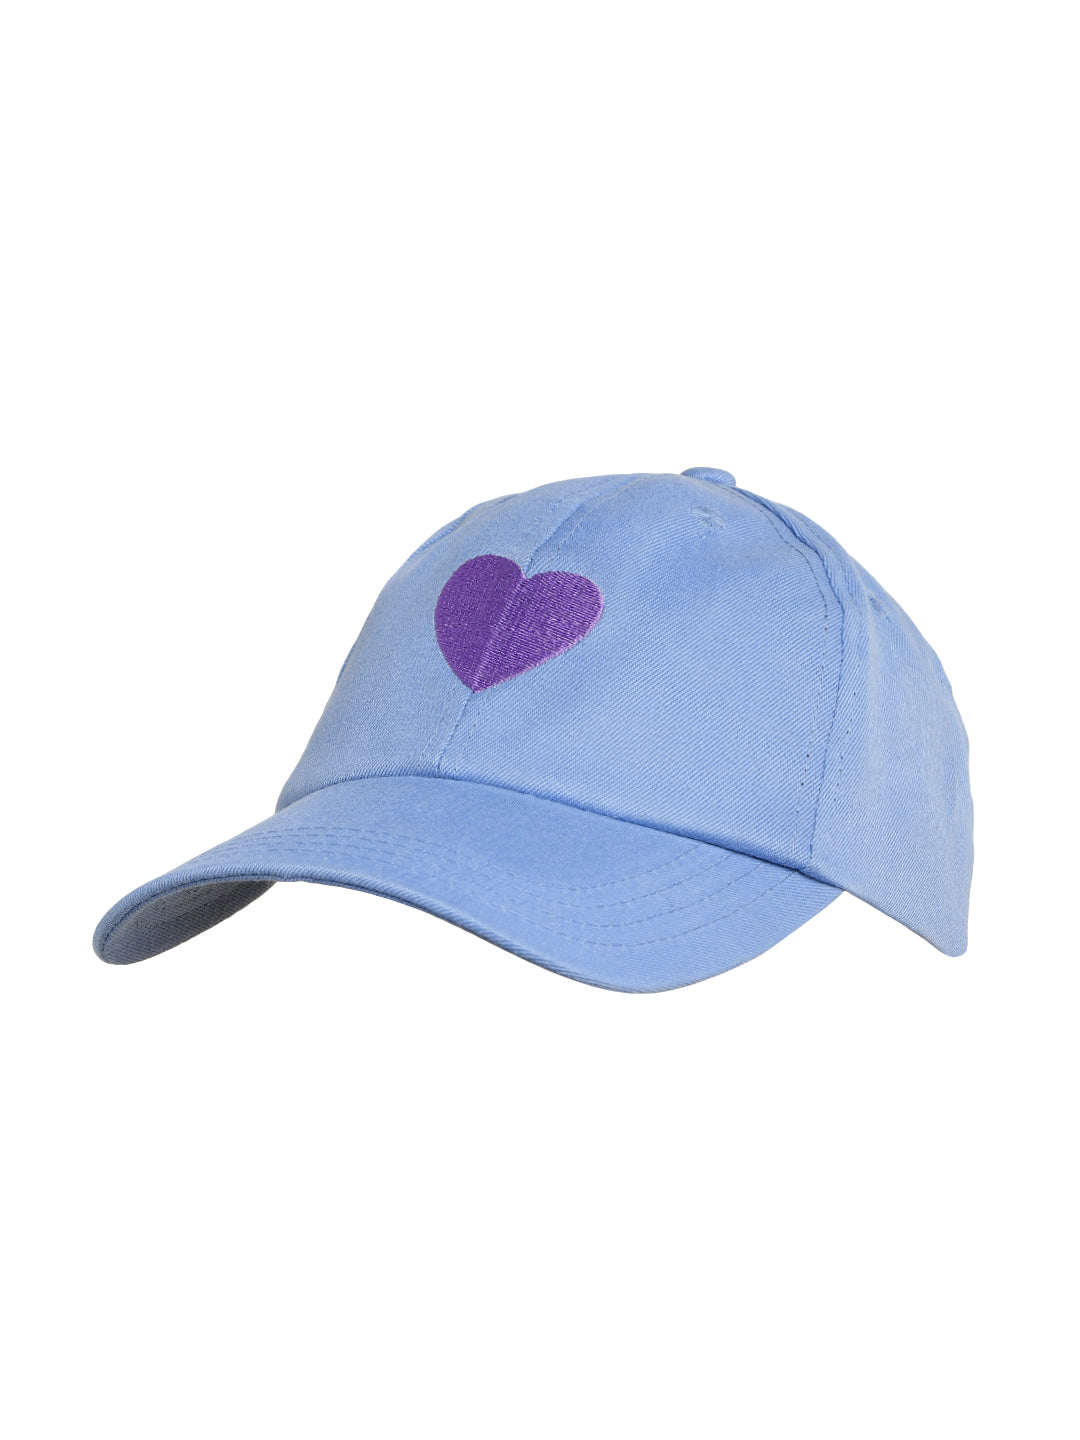 Blueberry KIDS pink red heart embroidery baseball cap